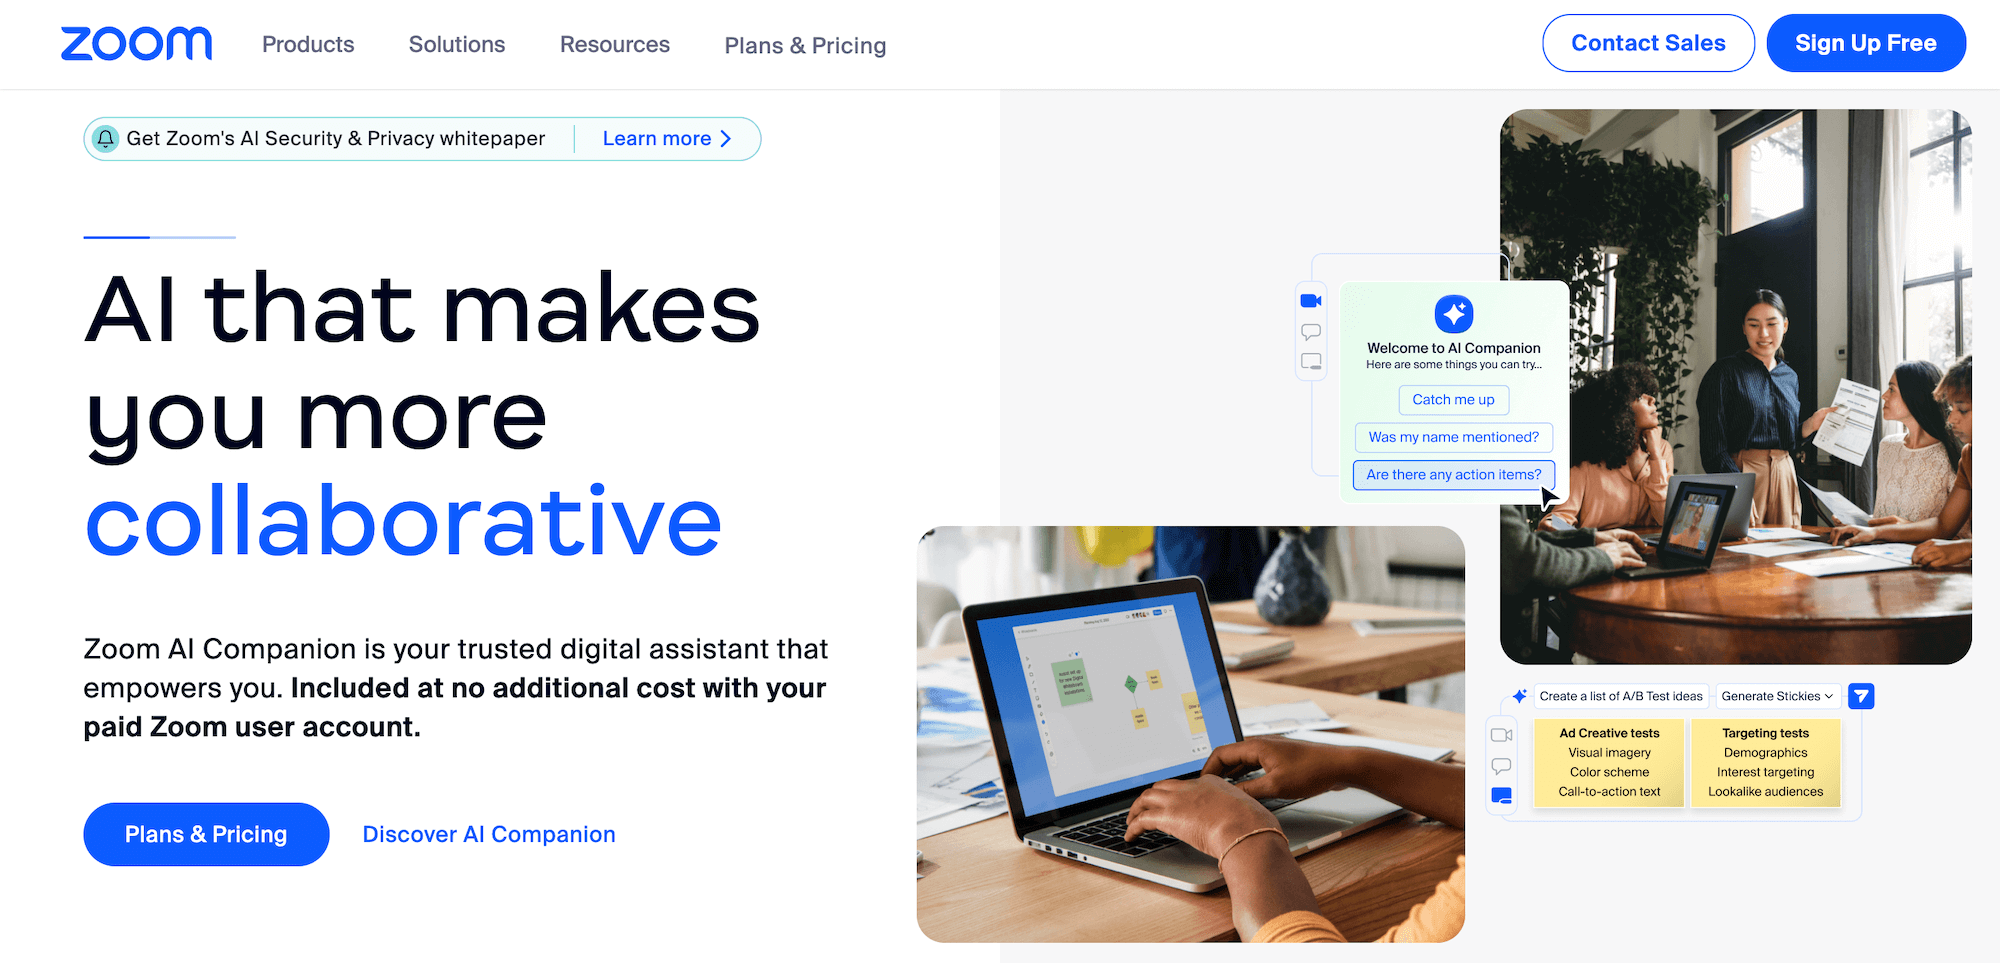 Zoom homepage: AI that makes you more collaborative